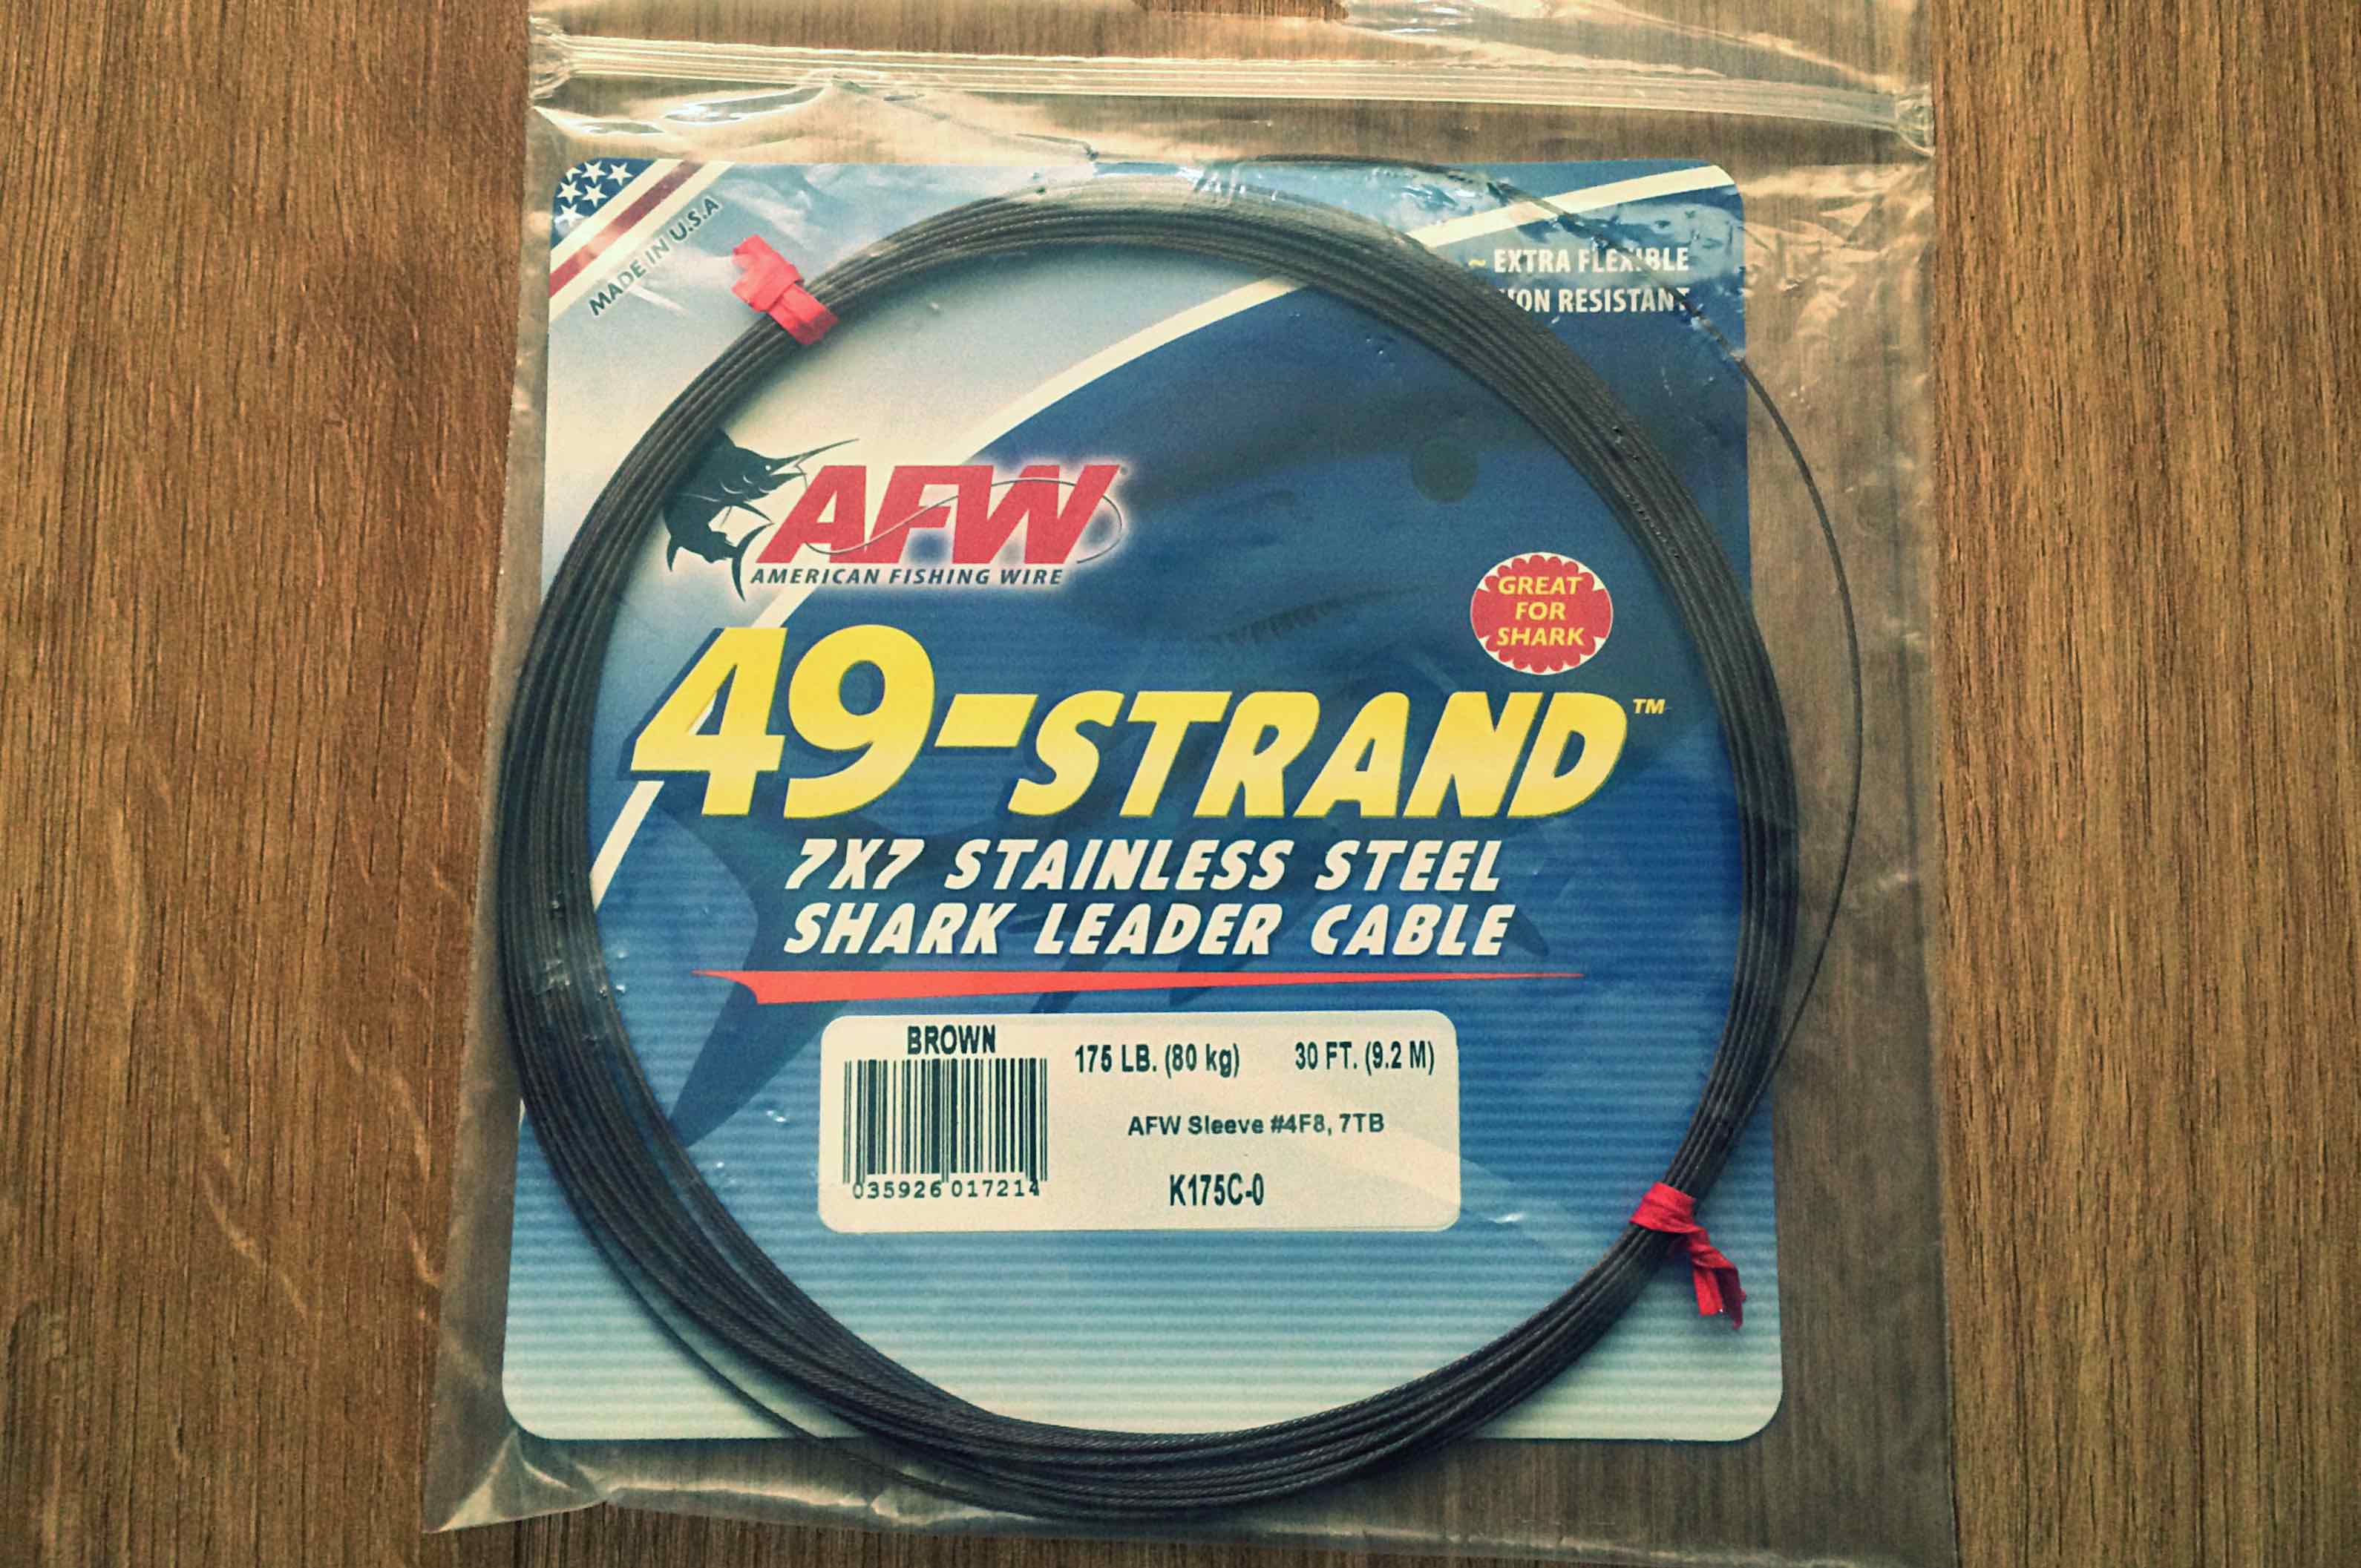 AFW AMERICAN FISHING WIRE 49-Stand 7x7 Stainless Steel Leader Cable 175lb Brown 